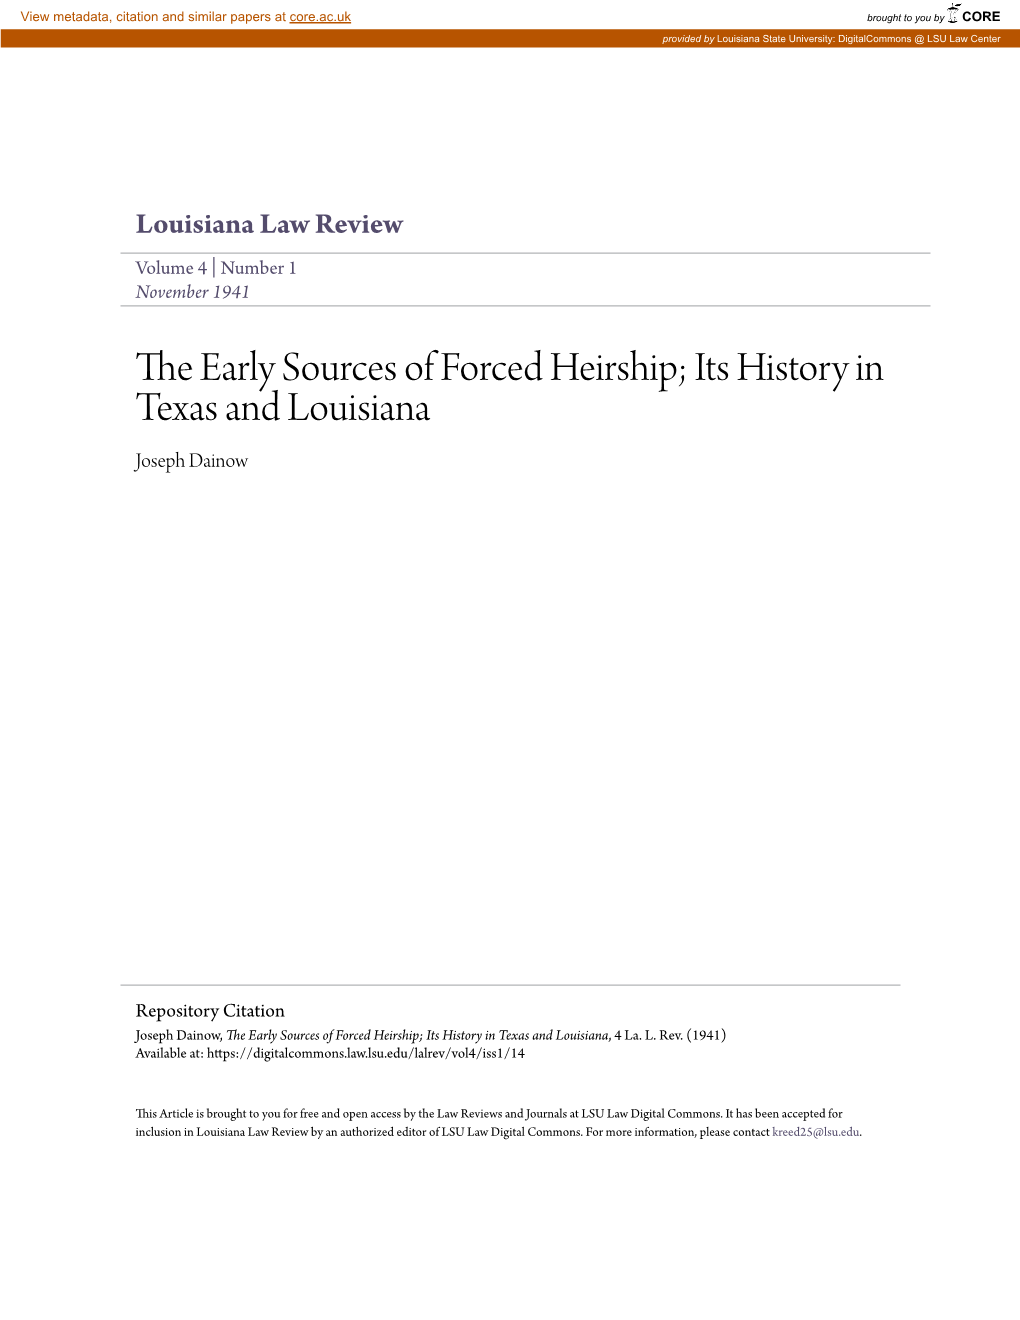 The Early Sources of Forced Heirship; Its History in Texas and Louisiana, 4 La